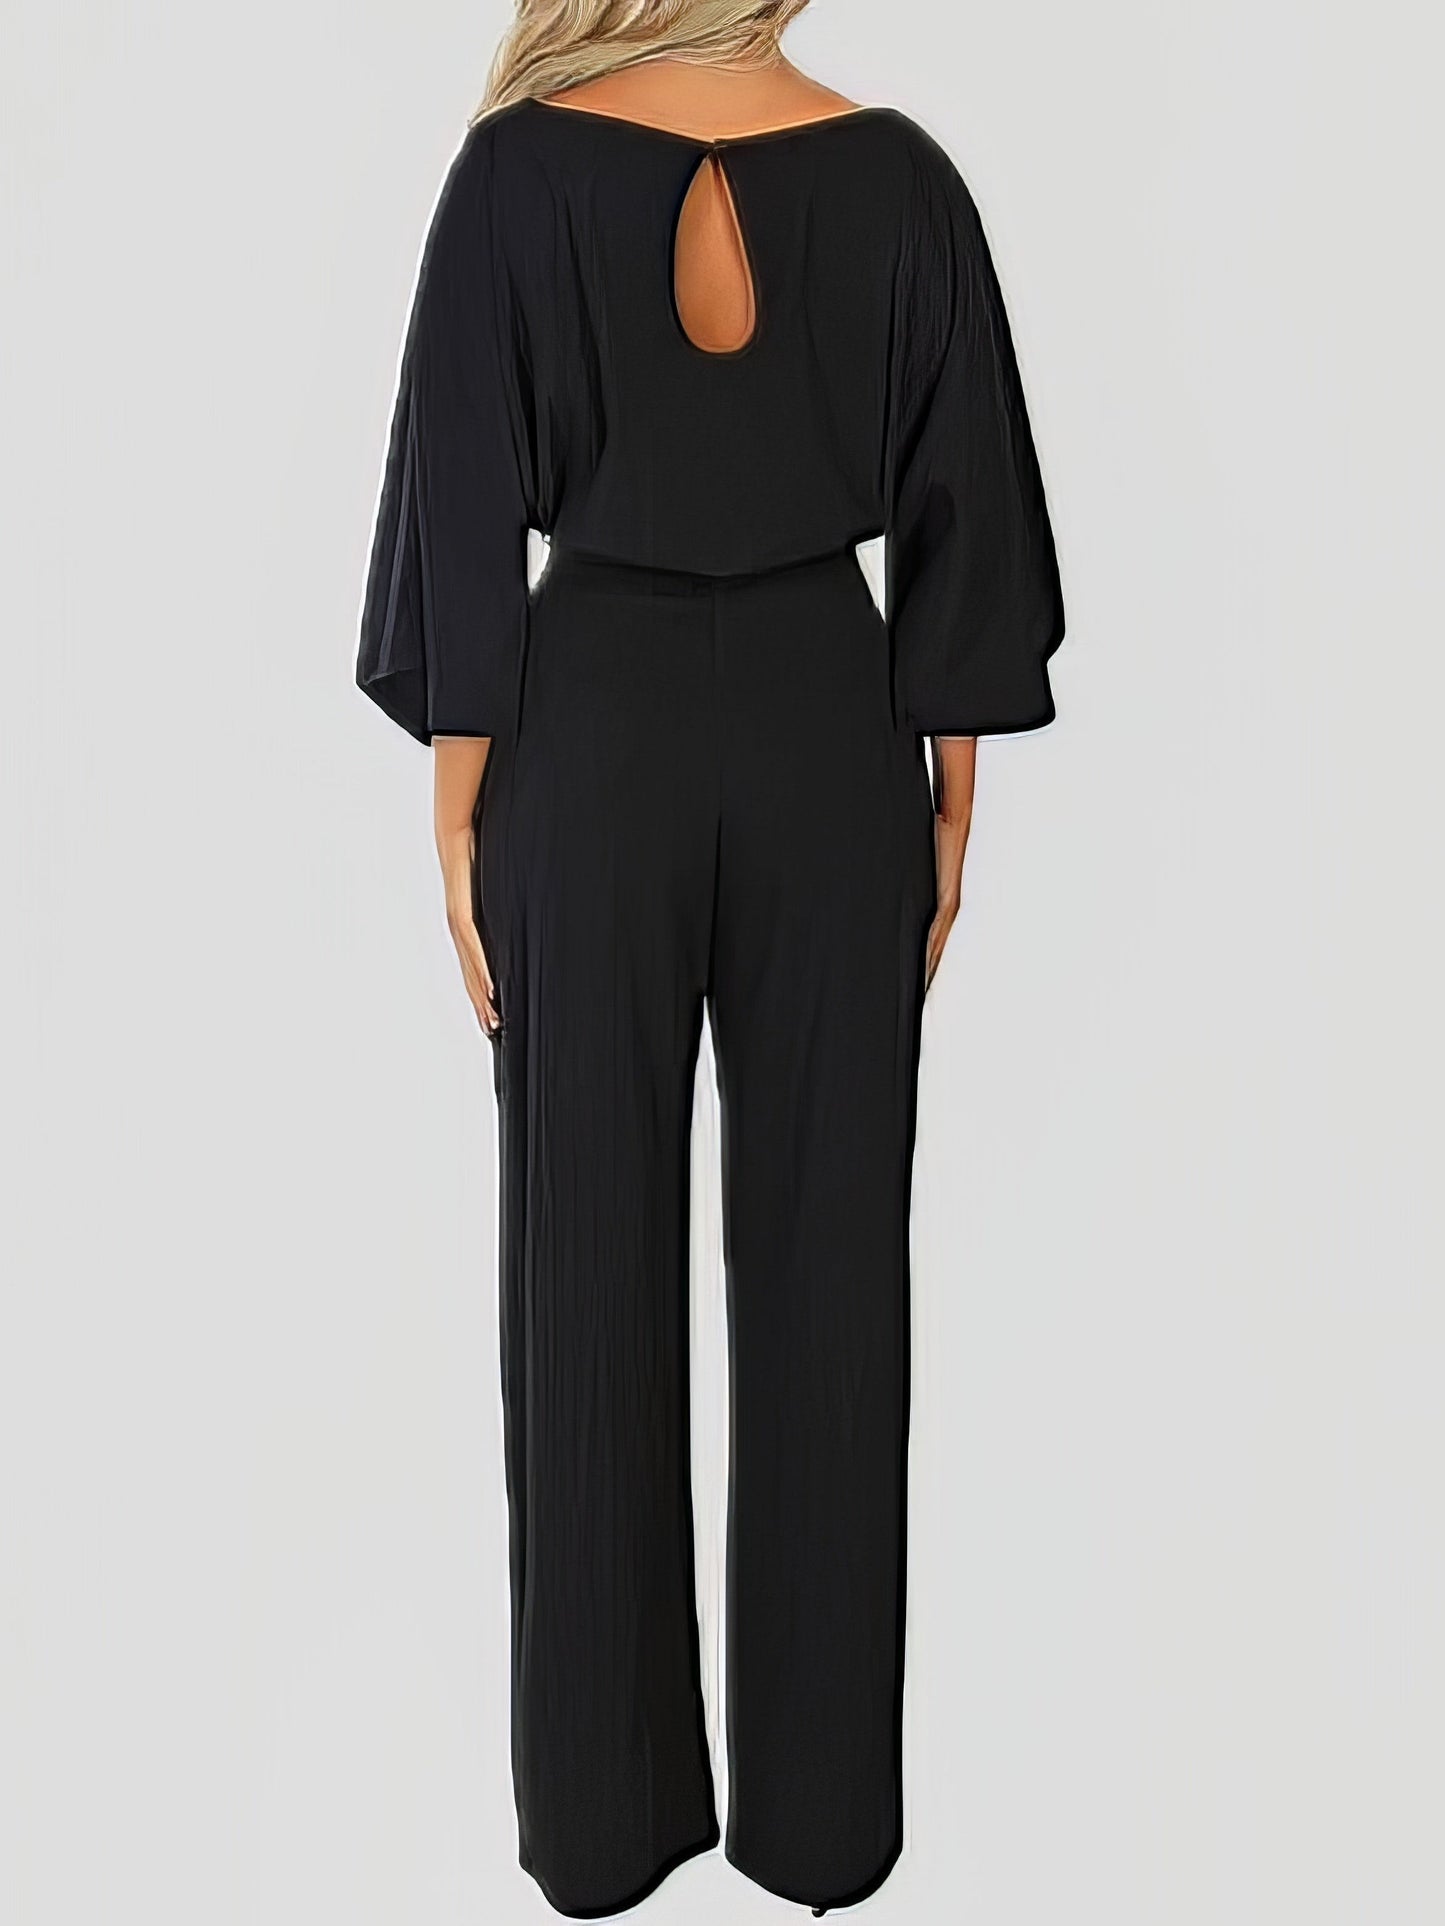 Jumpsuits - Casual Solid Belted Long Sleeve Jumpsuit - MsDressly